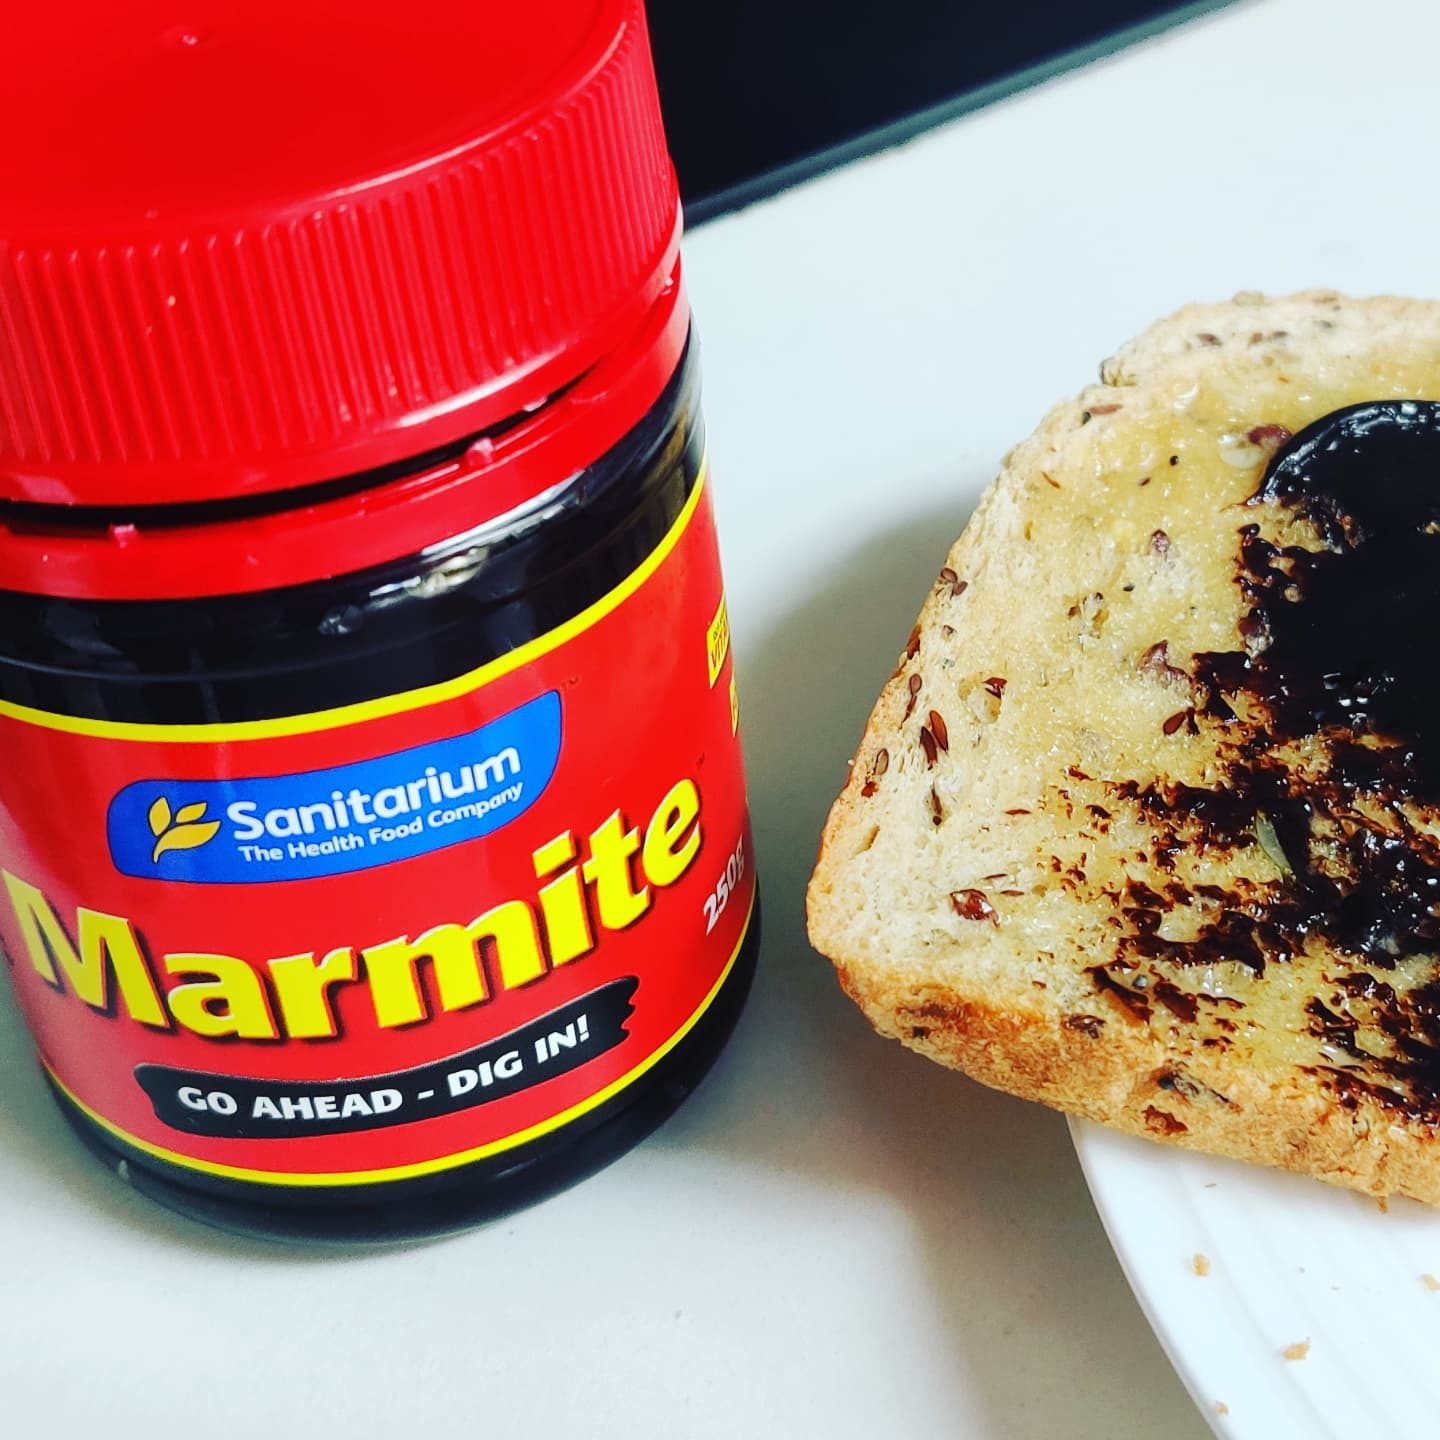 Inspired by @galettigram 's Guardian interview the other day, I've procured and will be giving New Zealand Marmite a go!